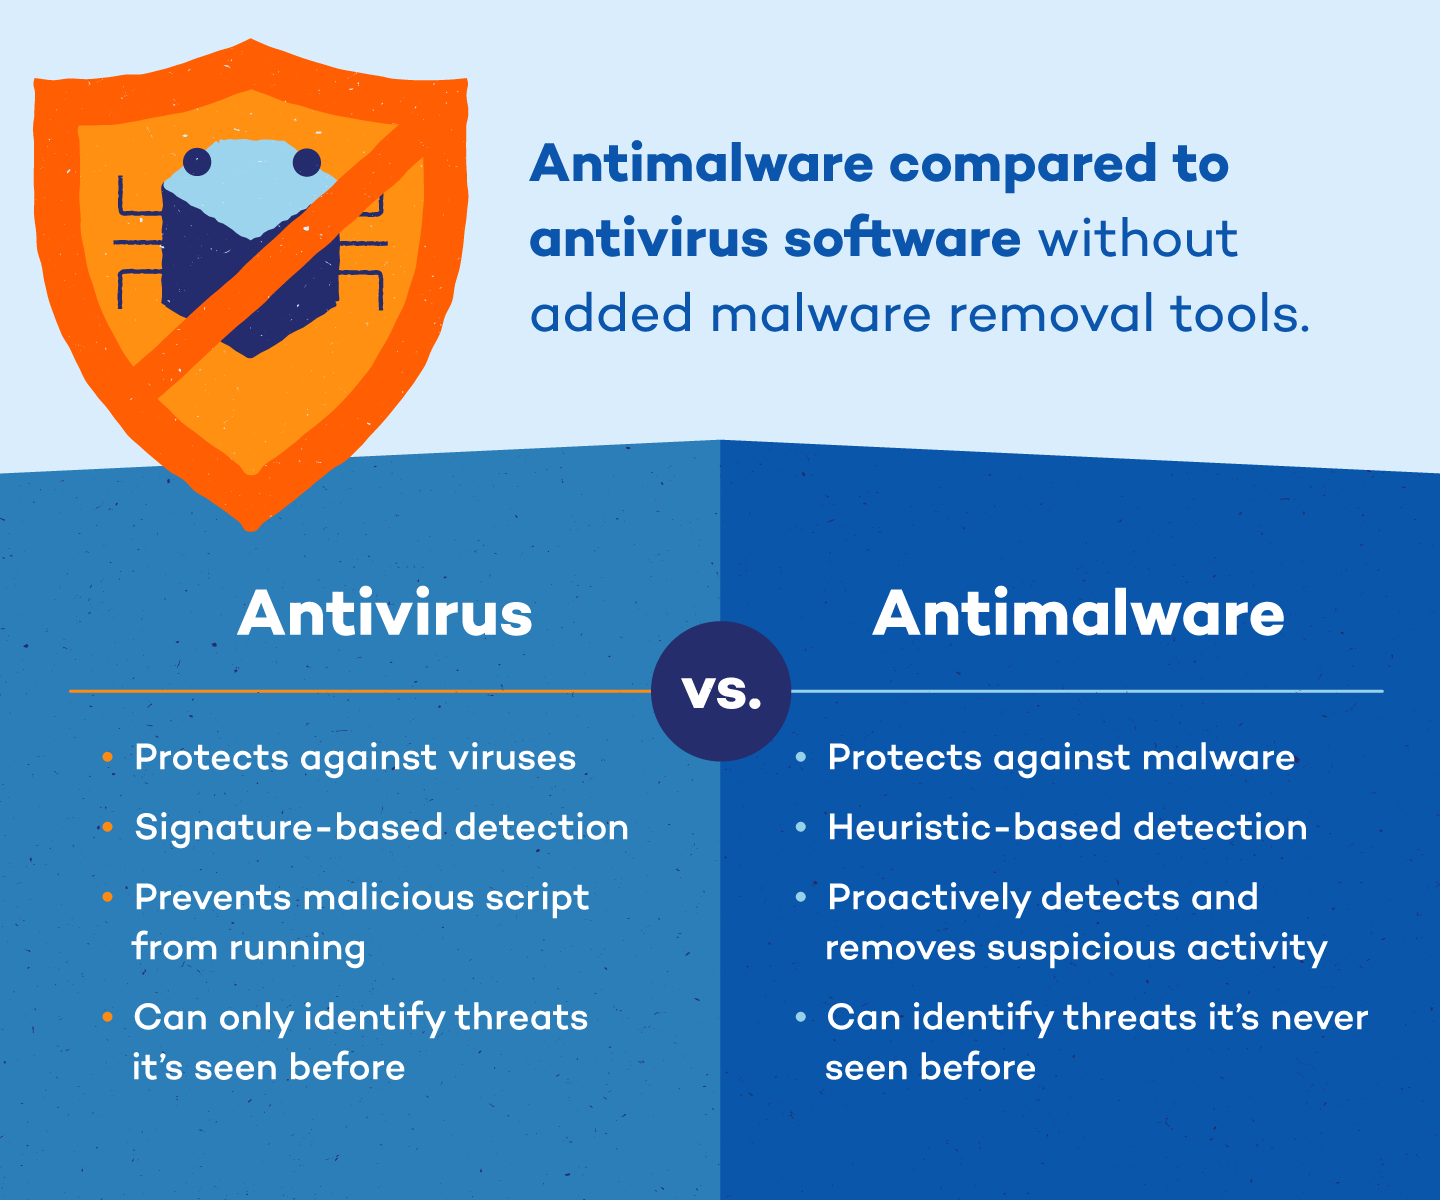 Step 1: Install a reliable antivirus or antimalware software if not already installed.
Step 2: Update the antivirus or antimalware software to ensure the latest virus definitions are used.